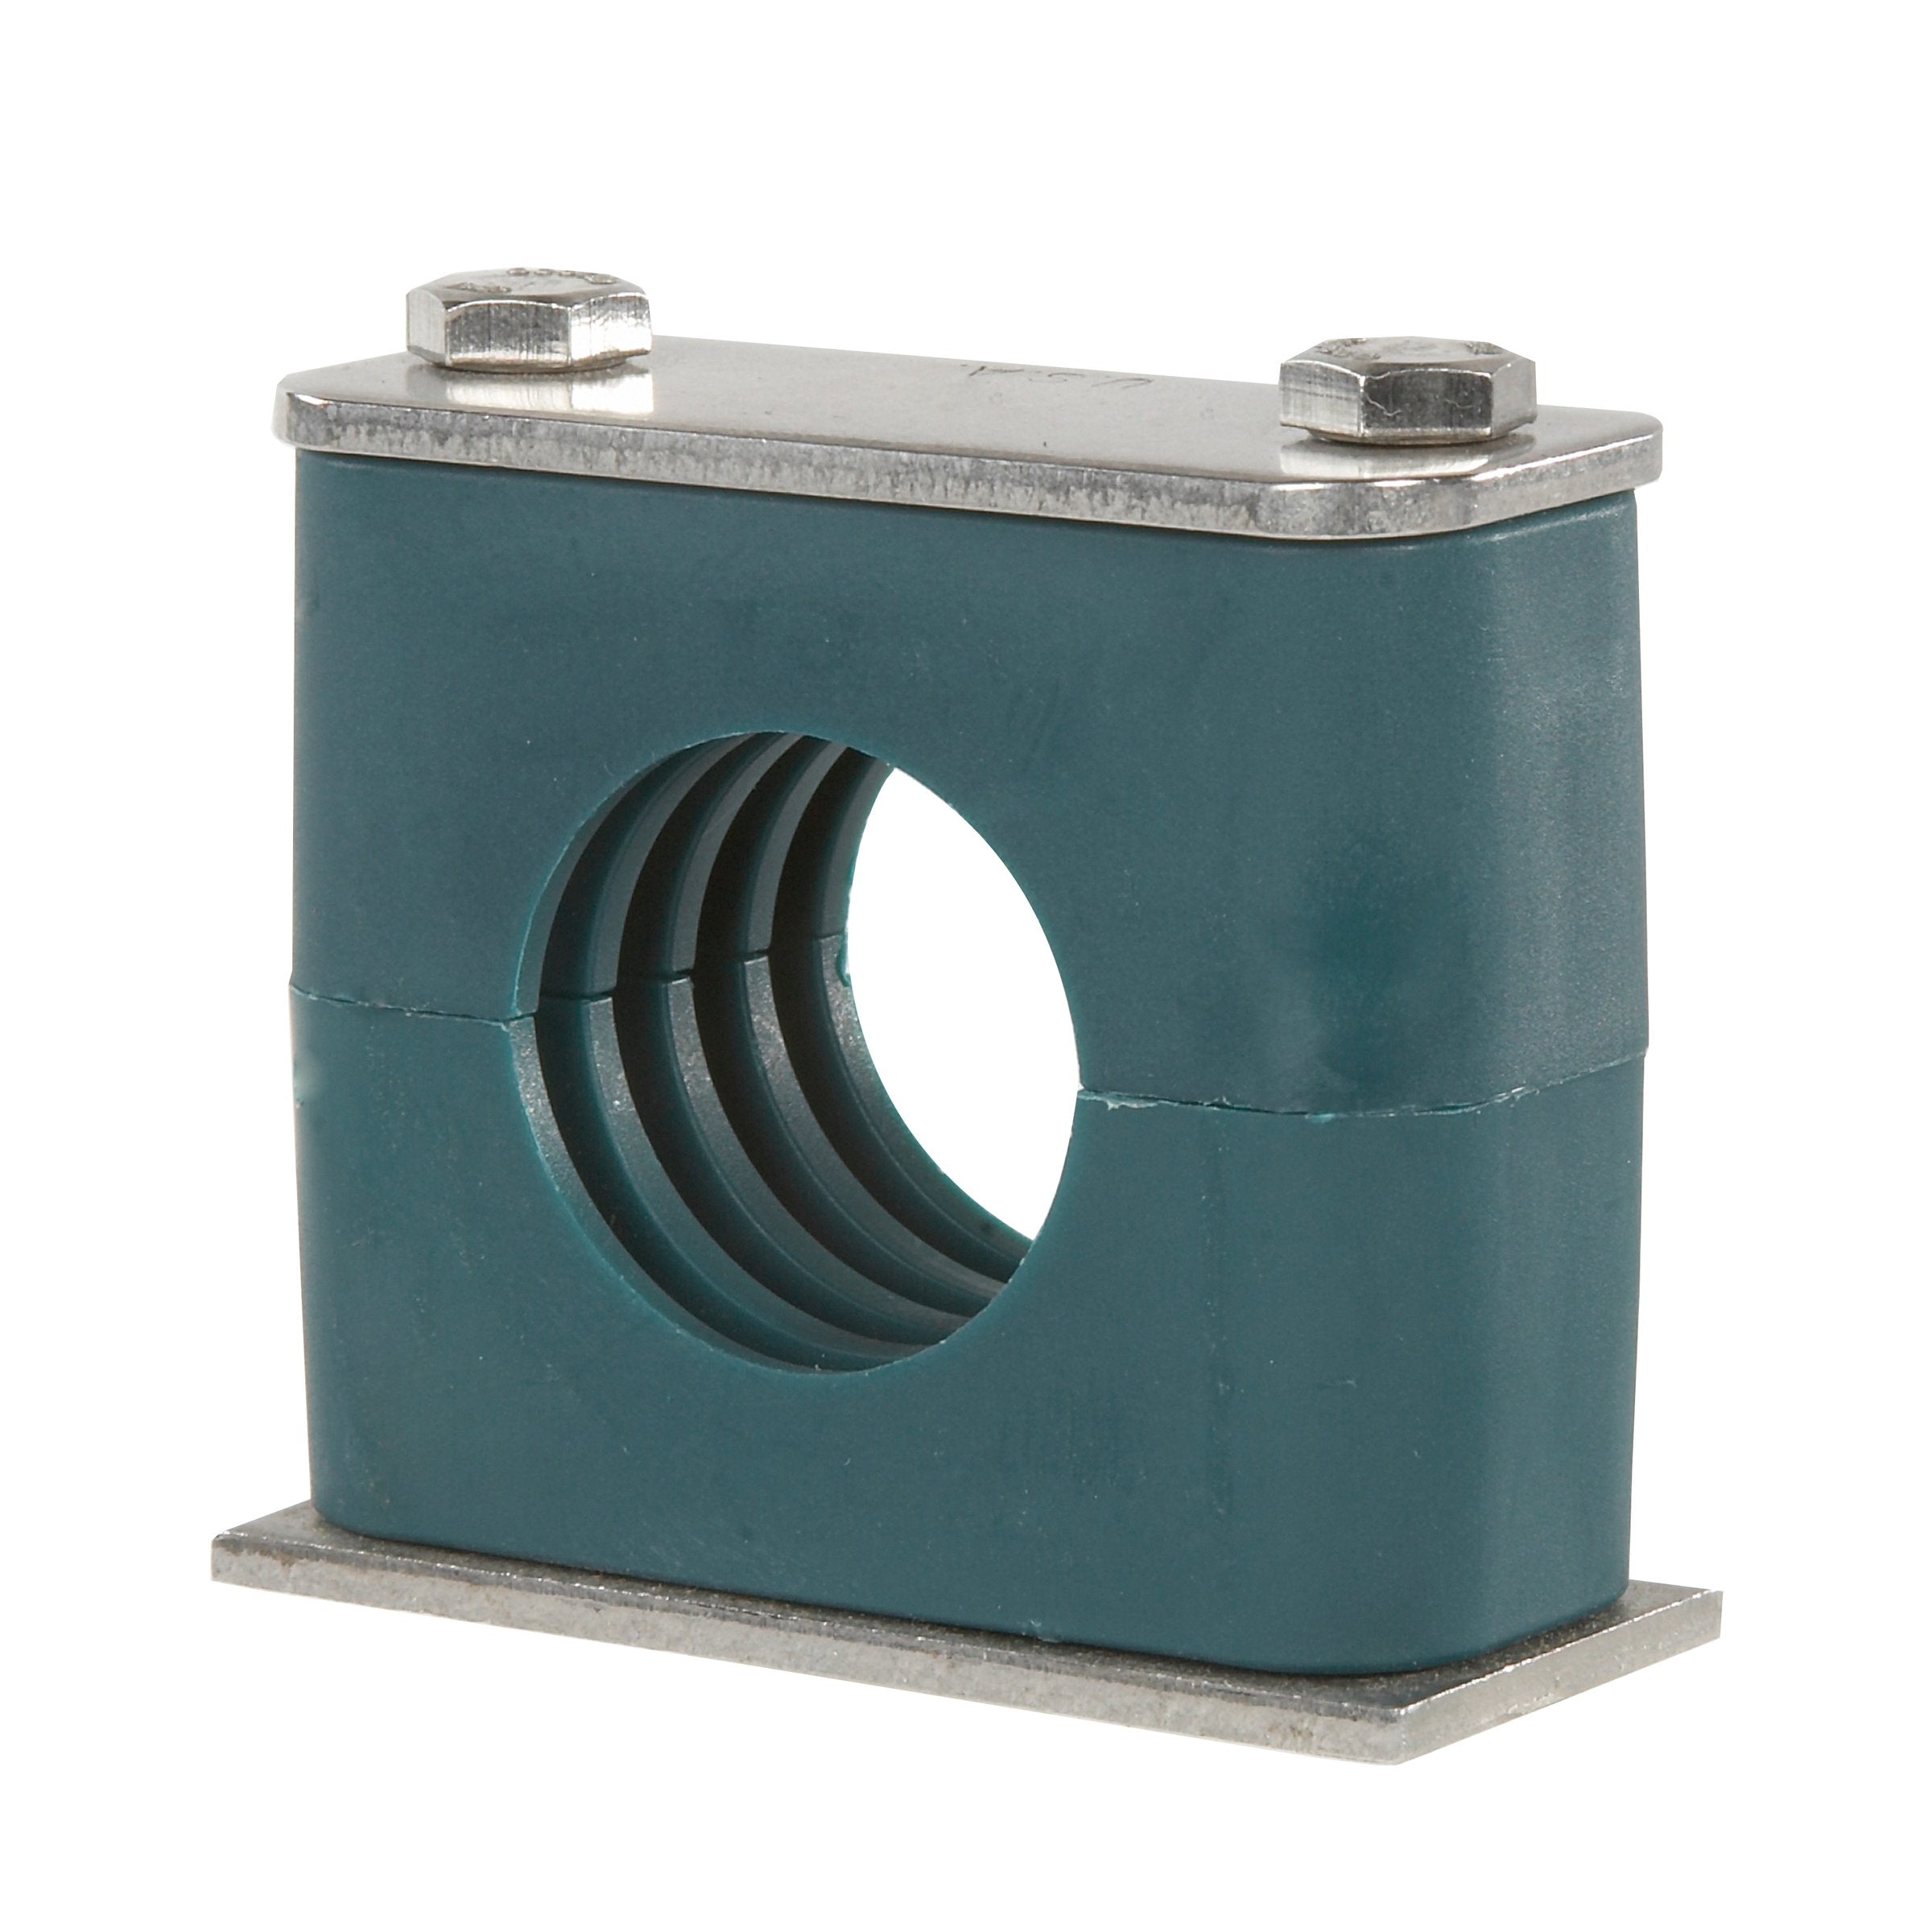 SP-319-PP-DP-AS-U-W5 : Stauff Clamp, Single Weld Plate, 0.75 inch (19mm) OD, for 3/4" Tube, Green PP Insert, Profiled Interior, 316SS